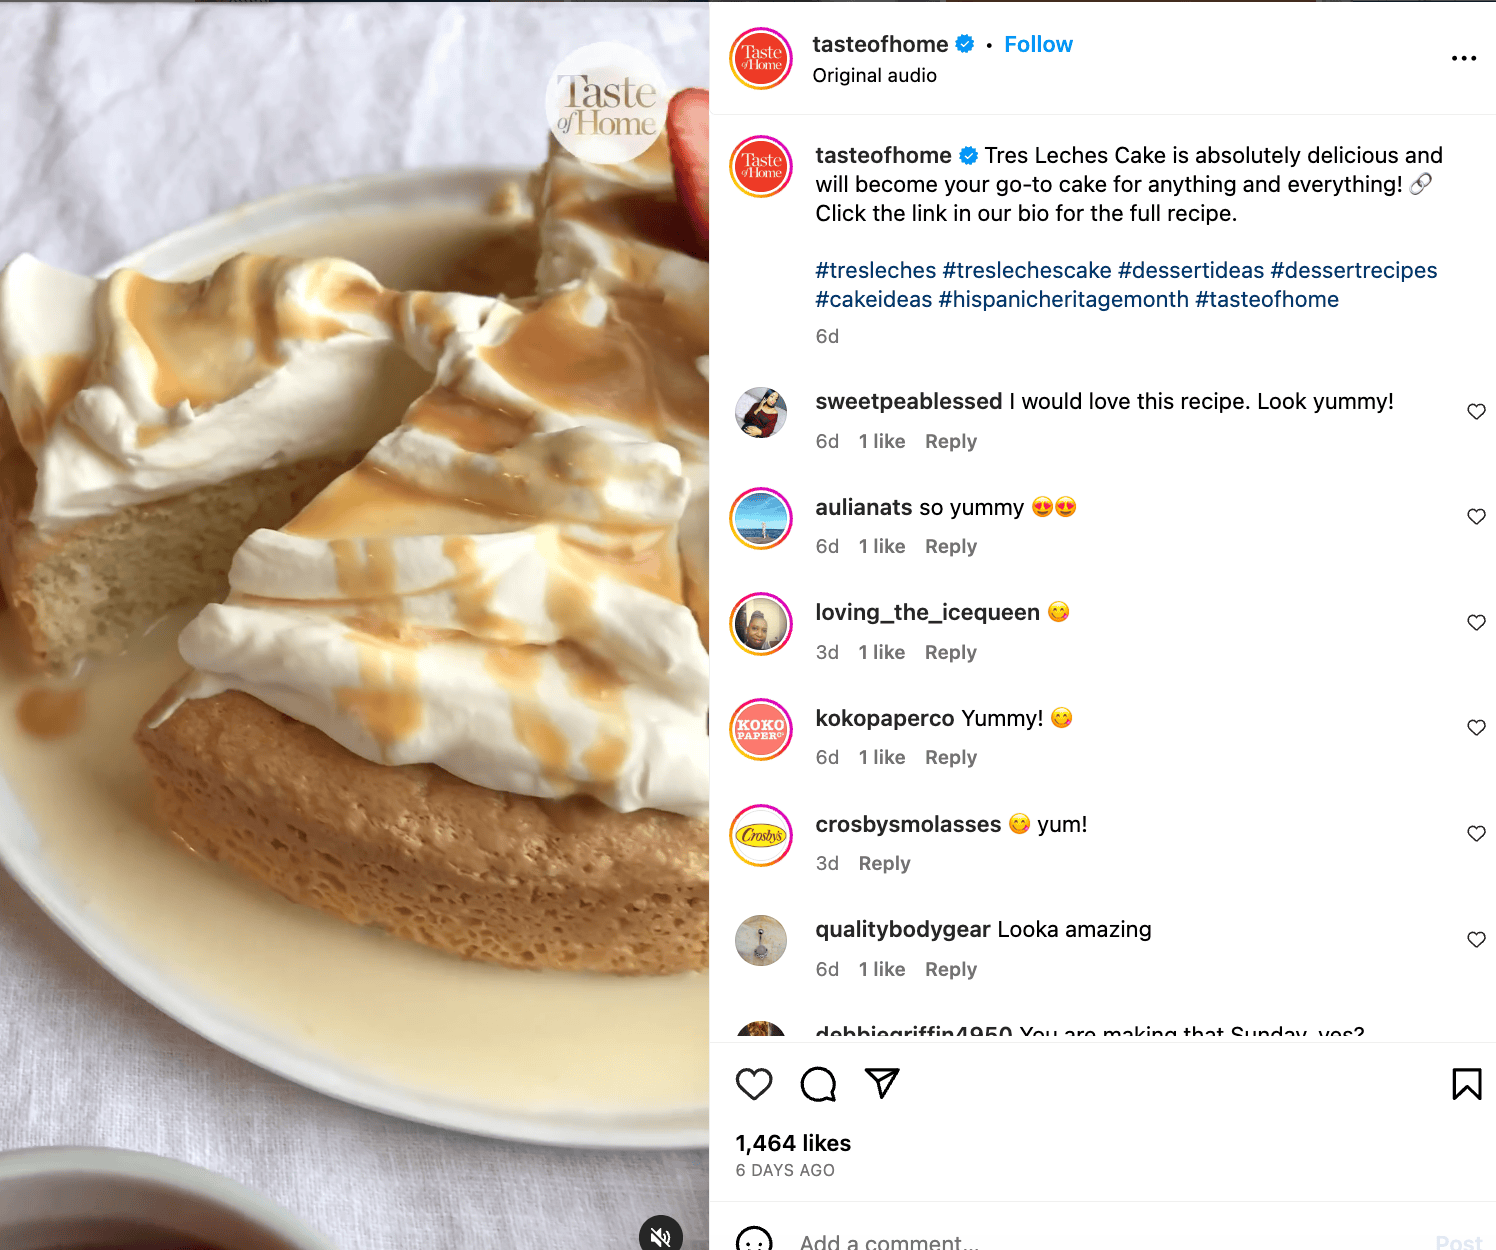 Tasteofhome's Instagram post for the Tres Leches Cake recipe